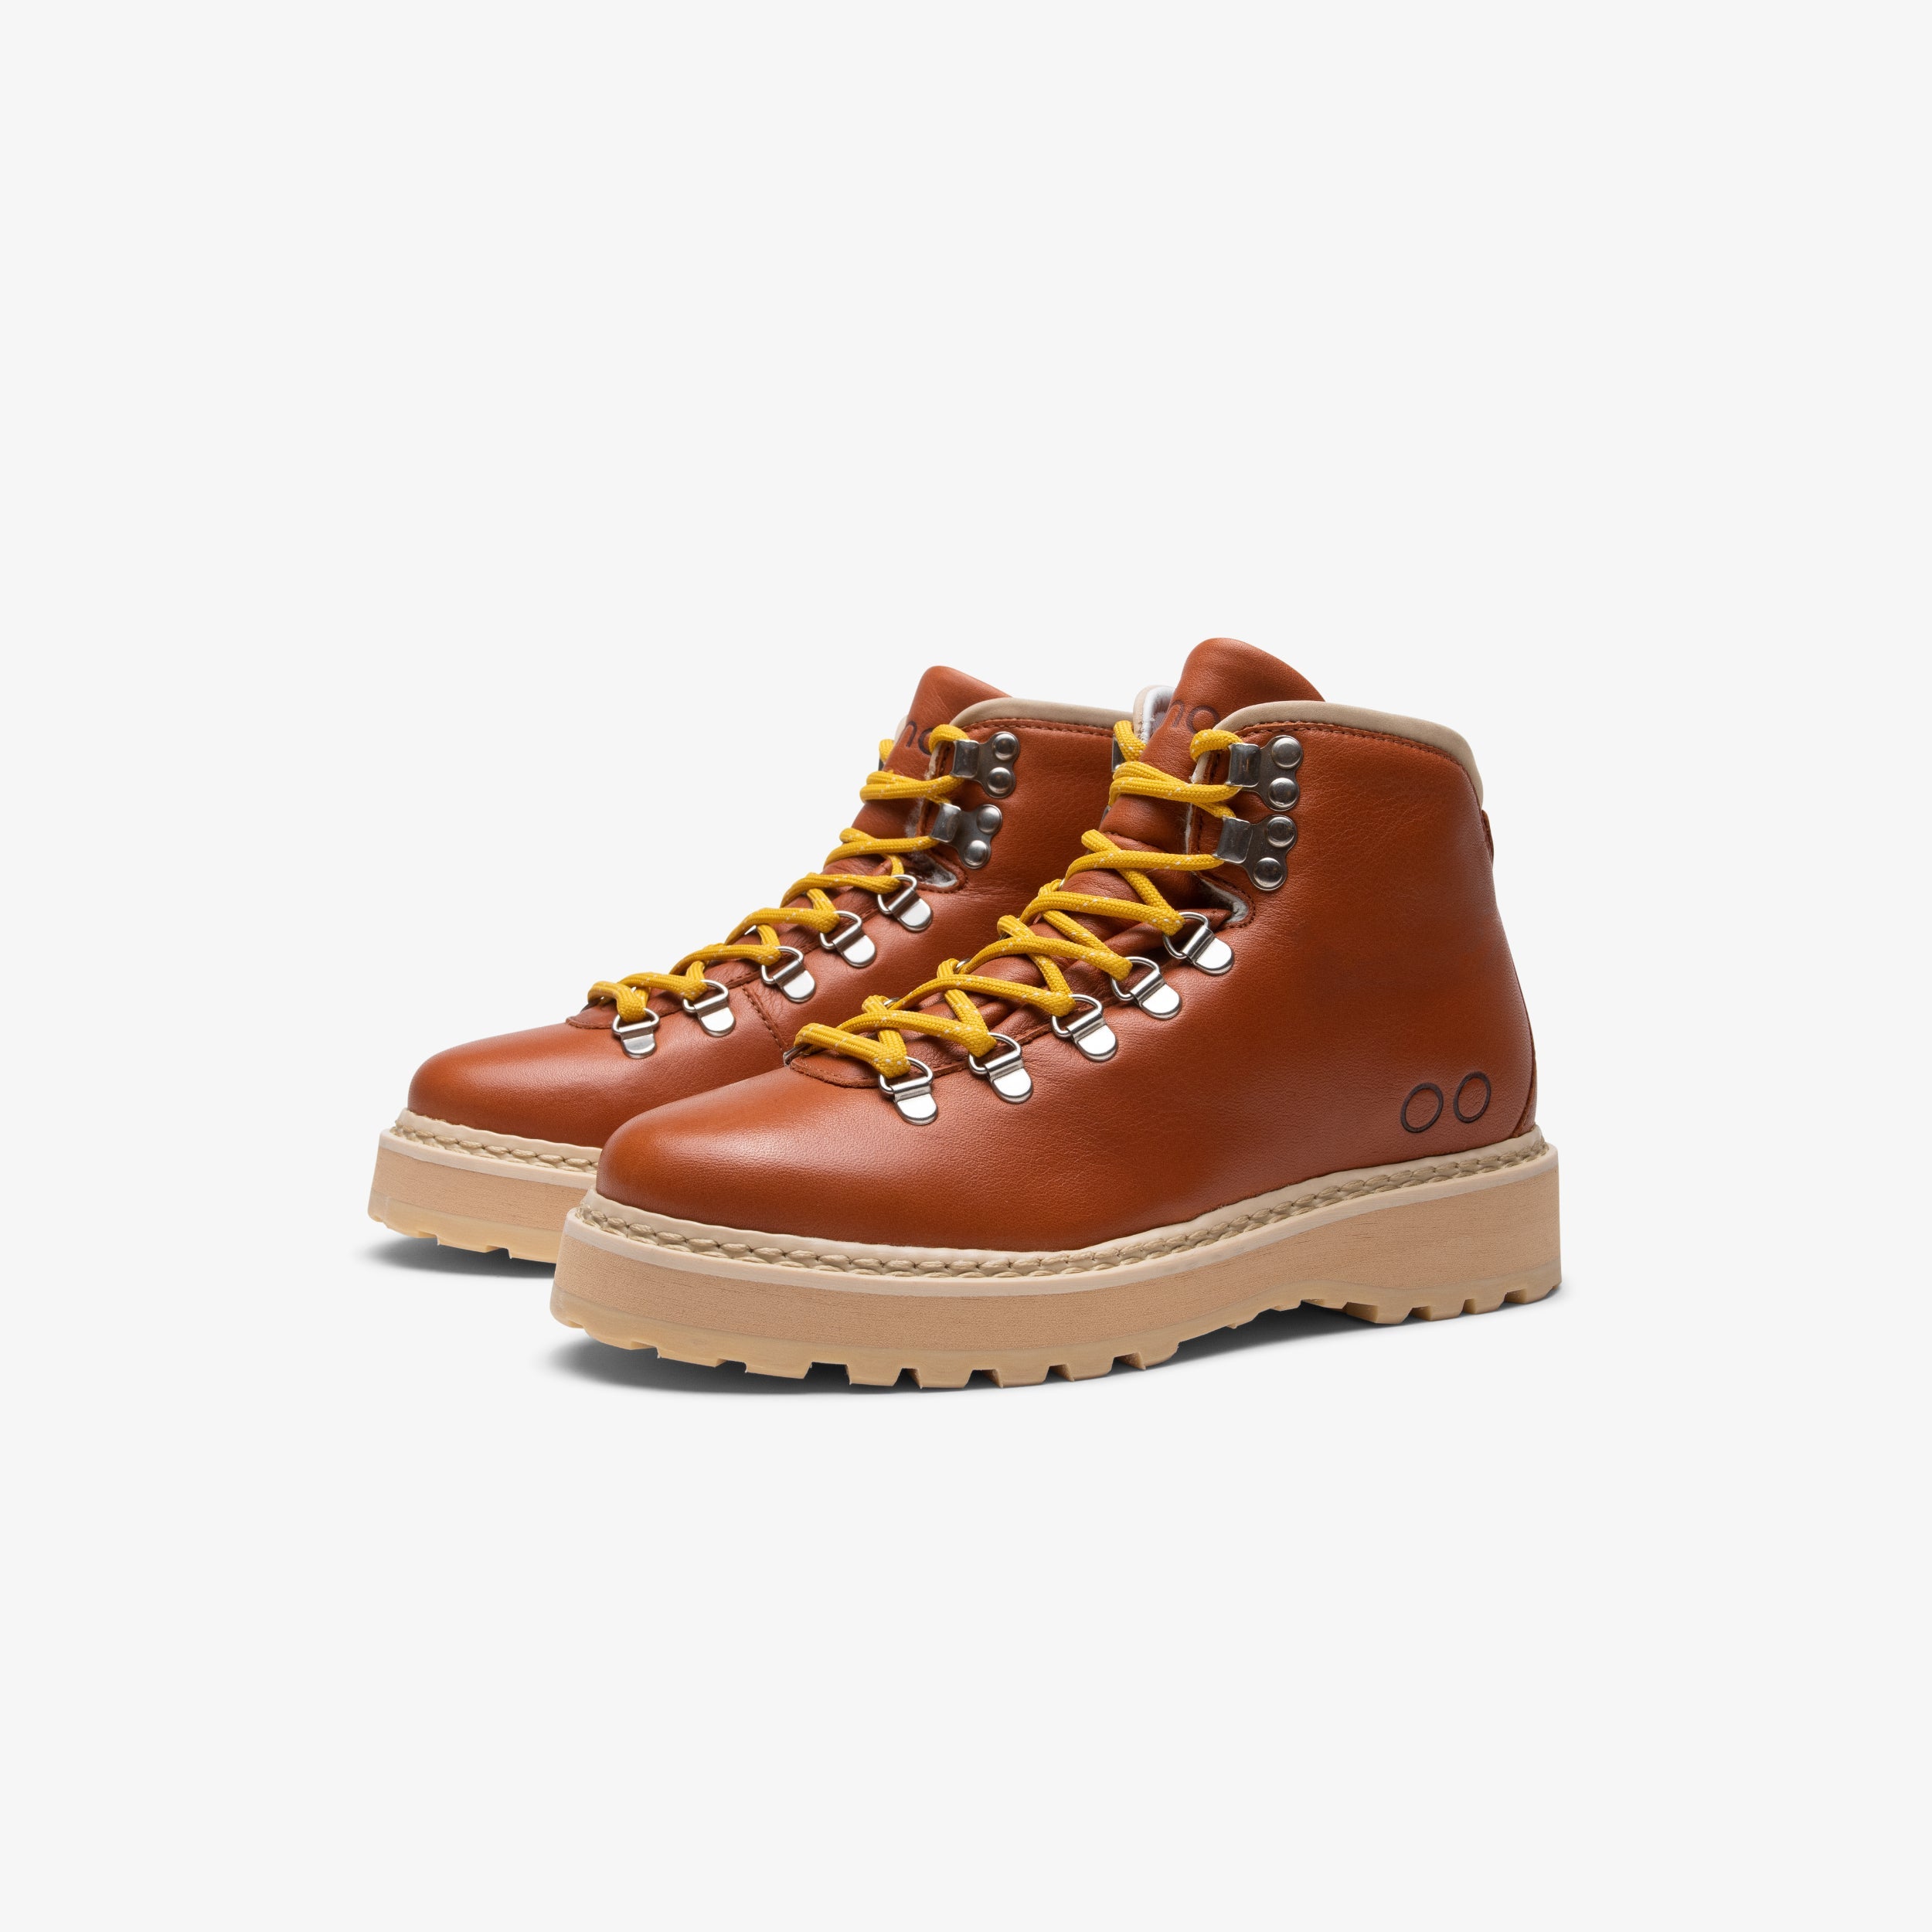 Hiking Core - Grained Leather - Shearling Lining - Womens